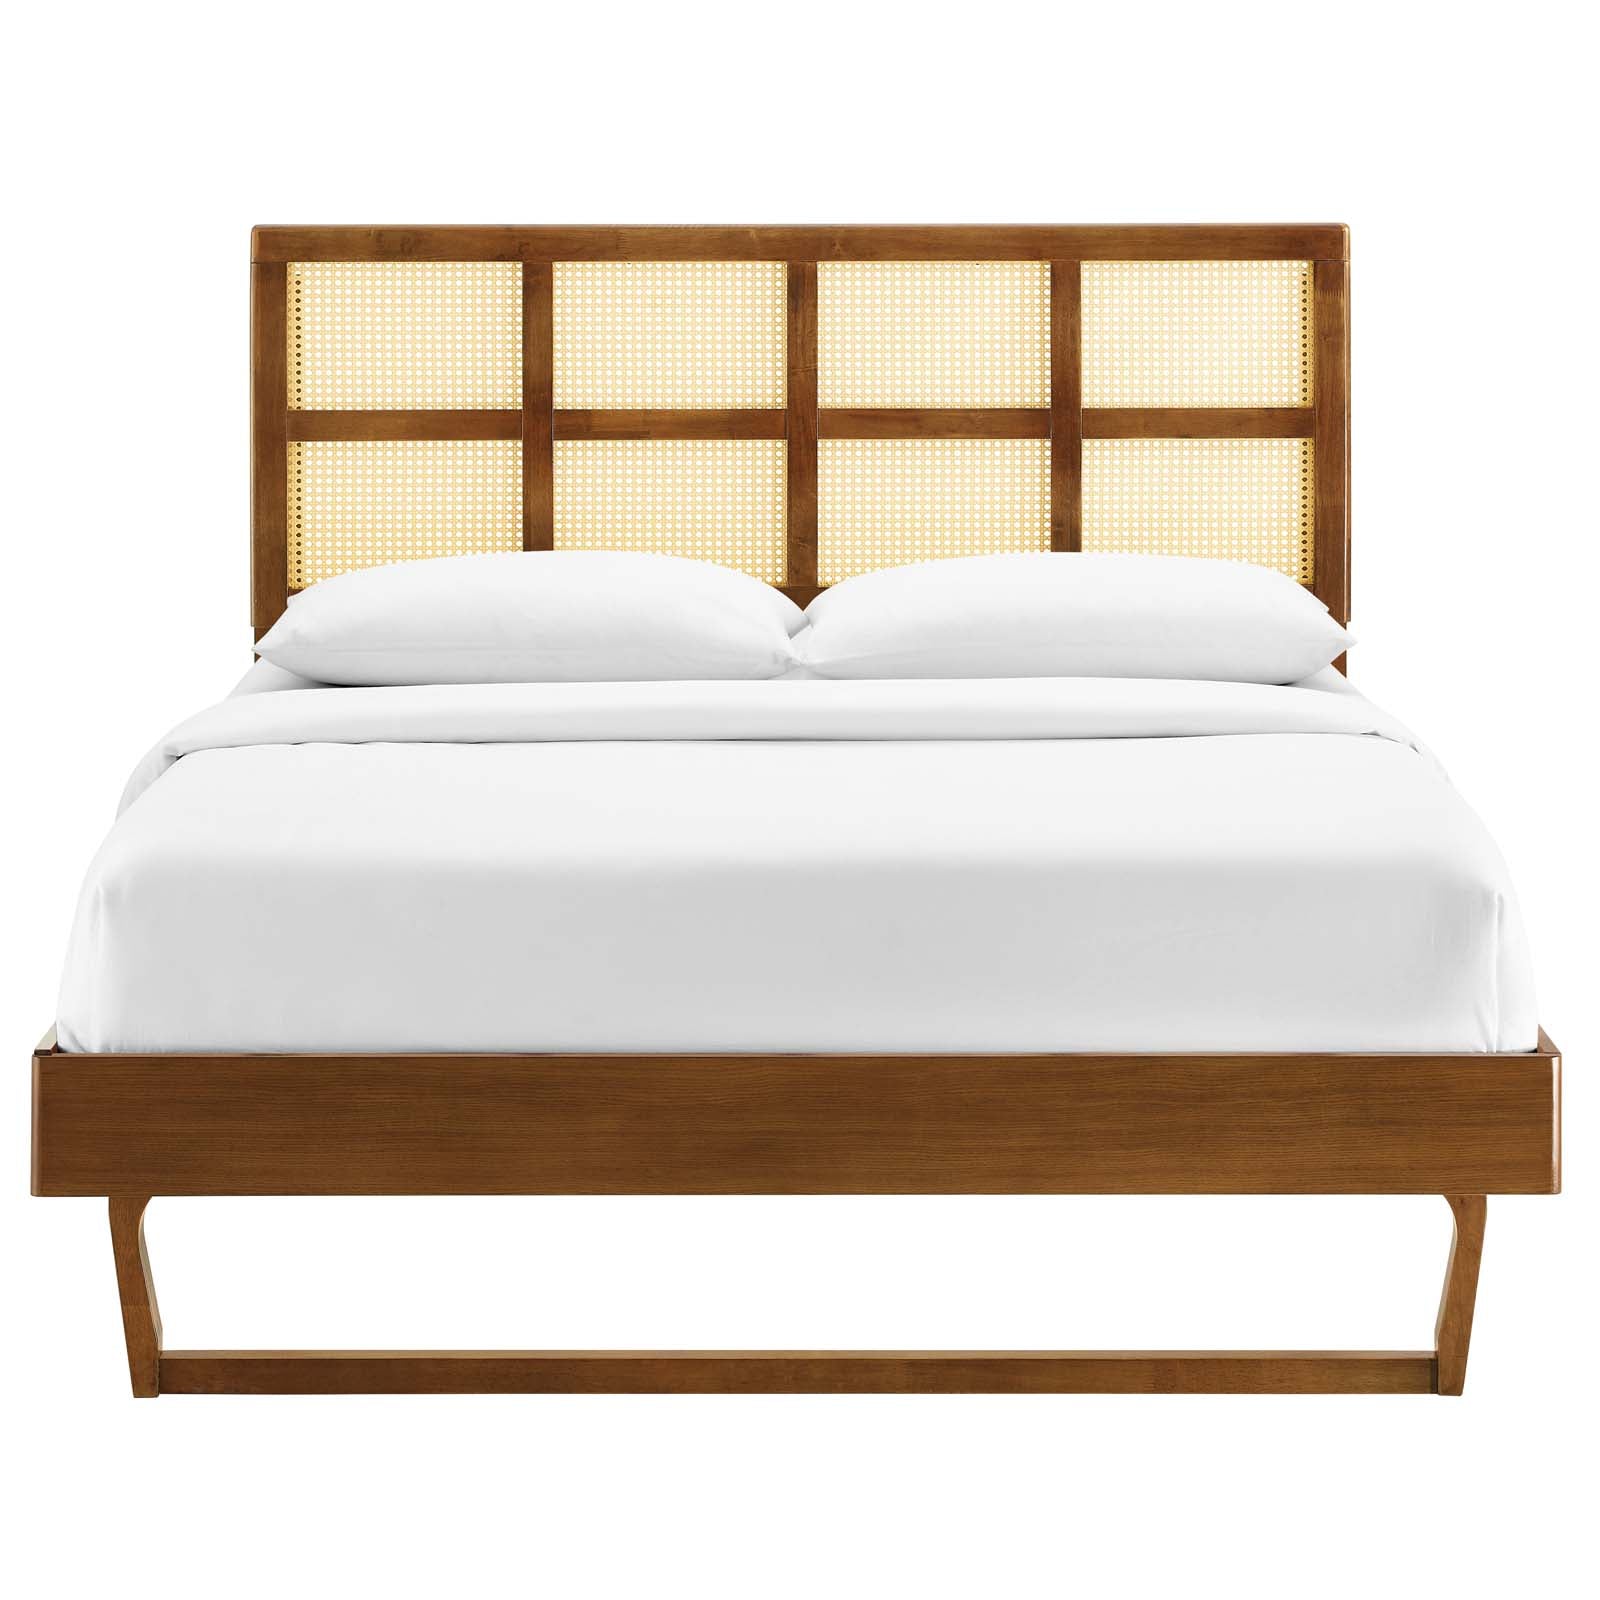 Modway Beds - Sidney Cane and Wood Full Platform Bed With Angular Legs Walnut